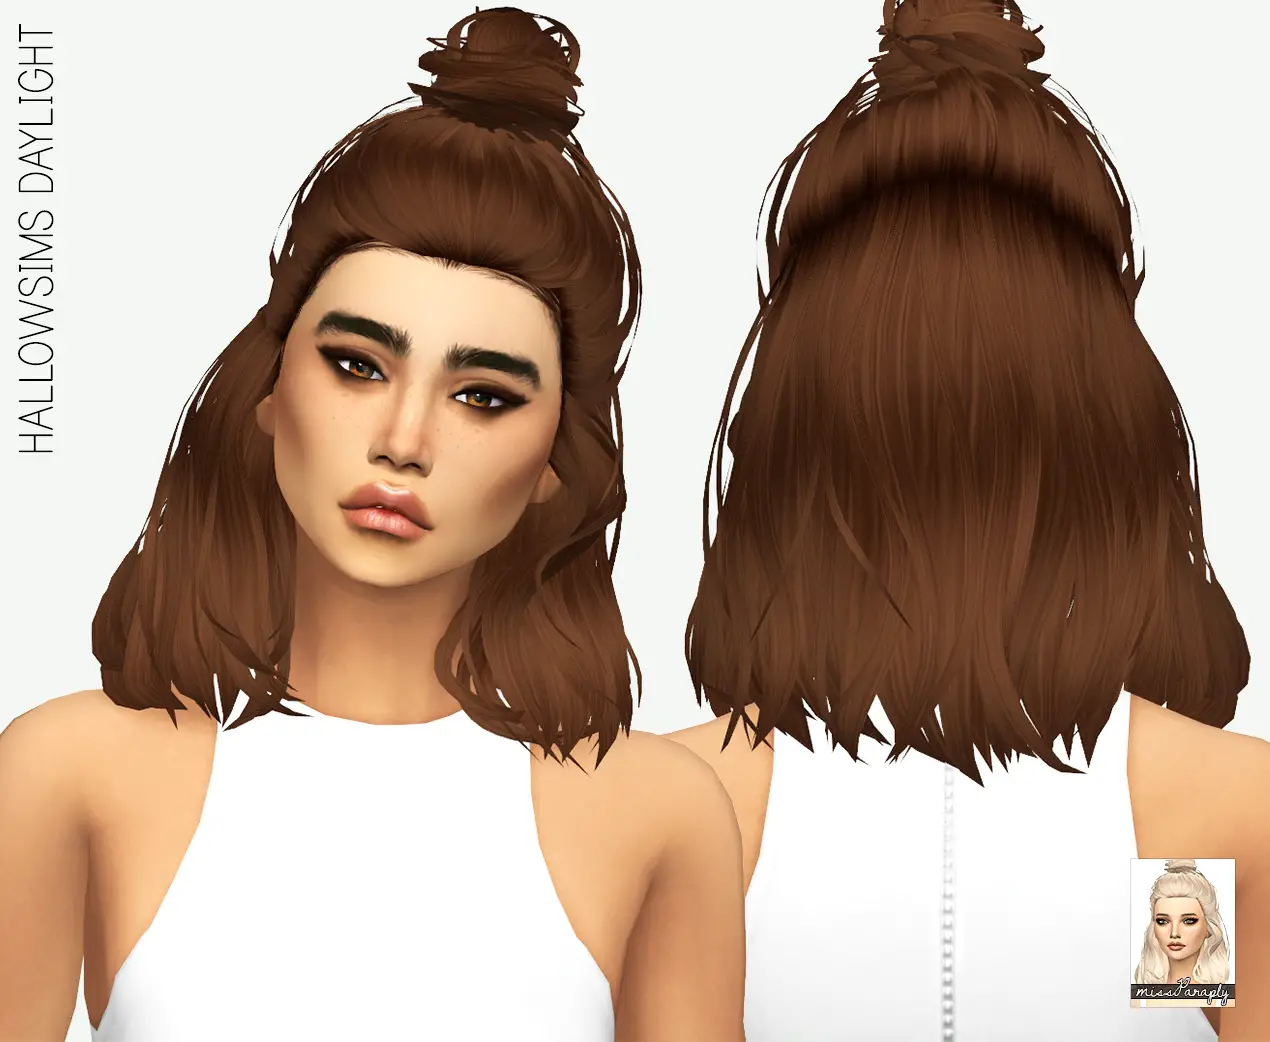 Sims 4 Hairs Miss Paraply Hallow`s Daylight Hair Retextured